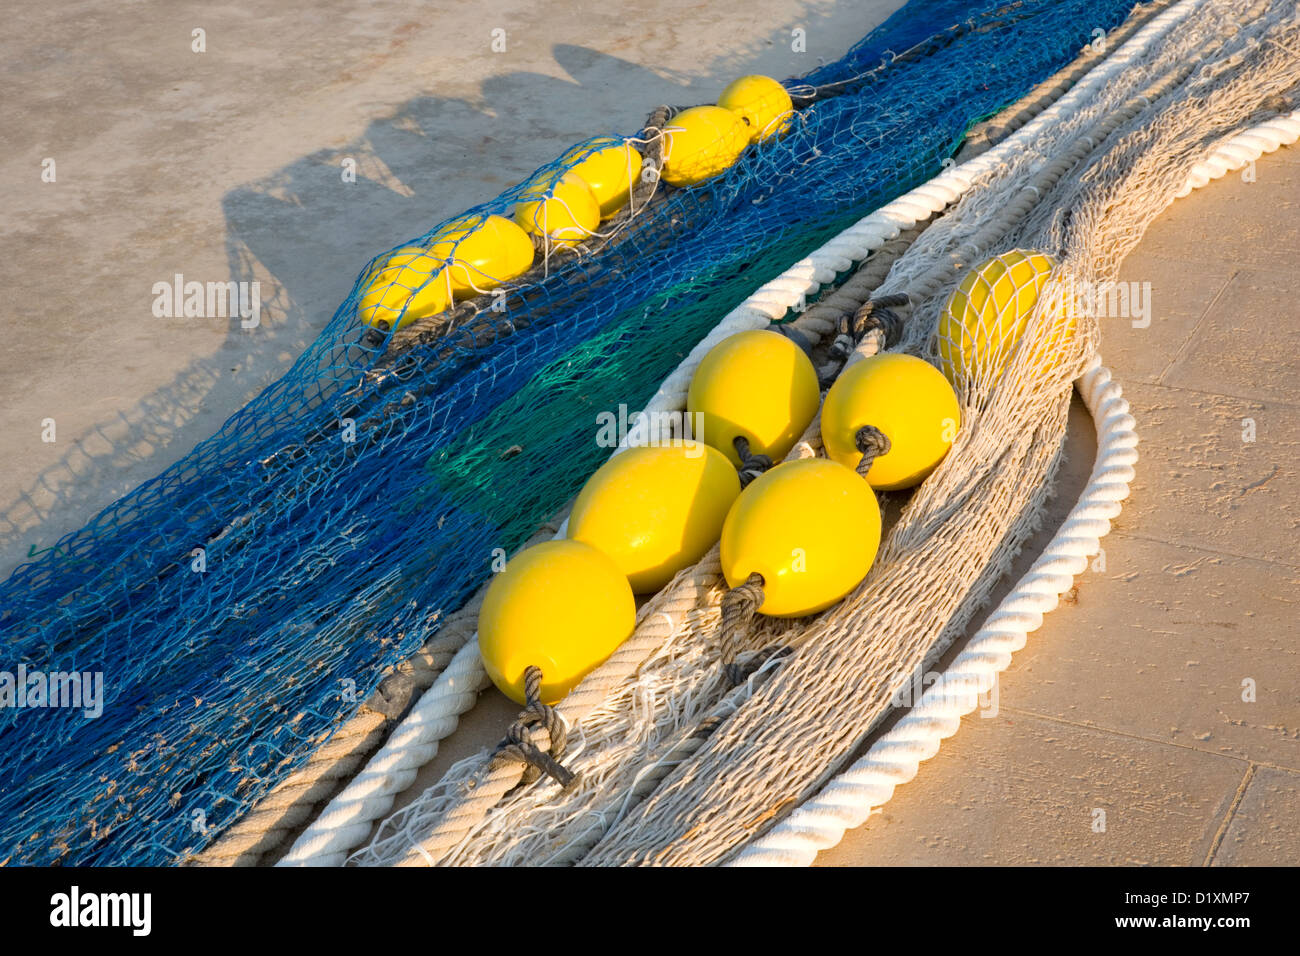 Port de Sóller, Mallorca, Balearic Islands, Spain. Colourful fishing nets and floats on the quay. Stock Photo